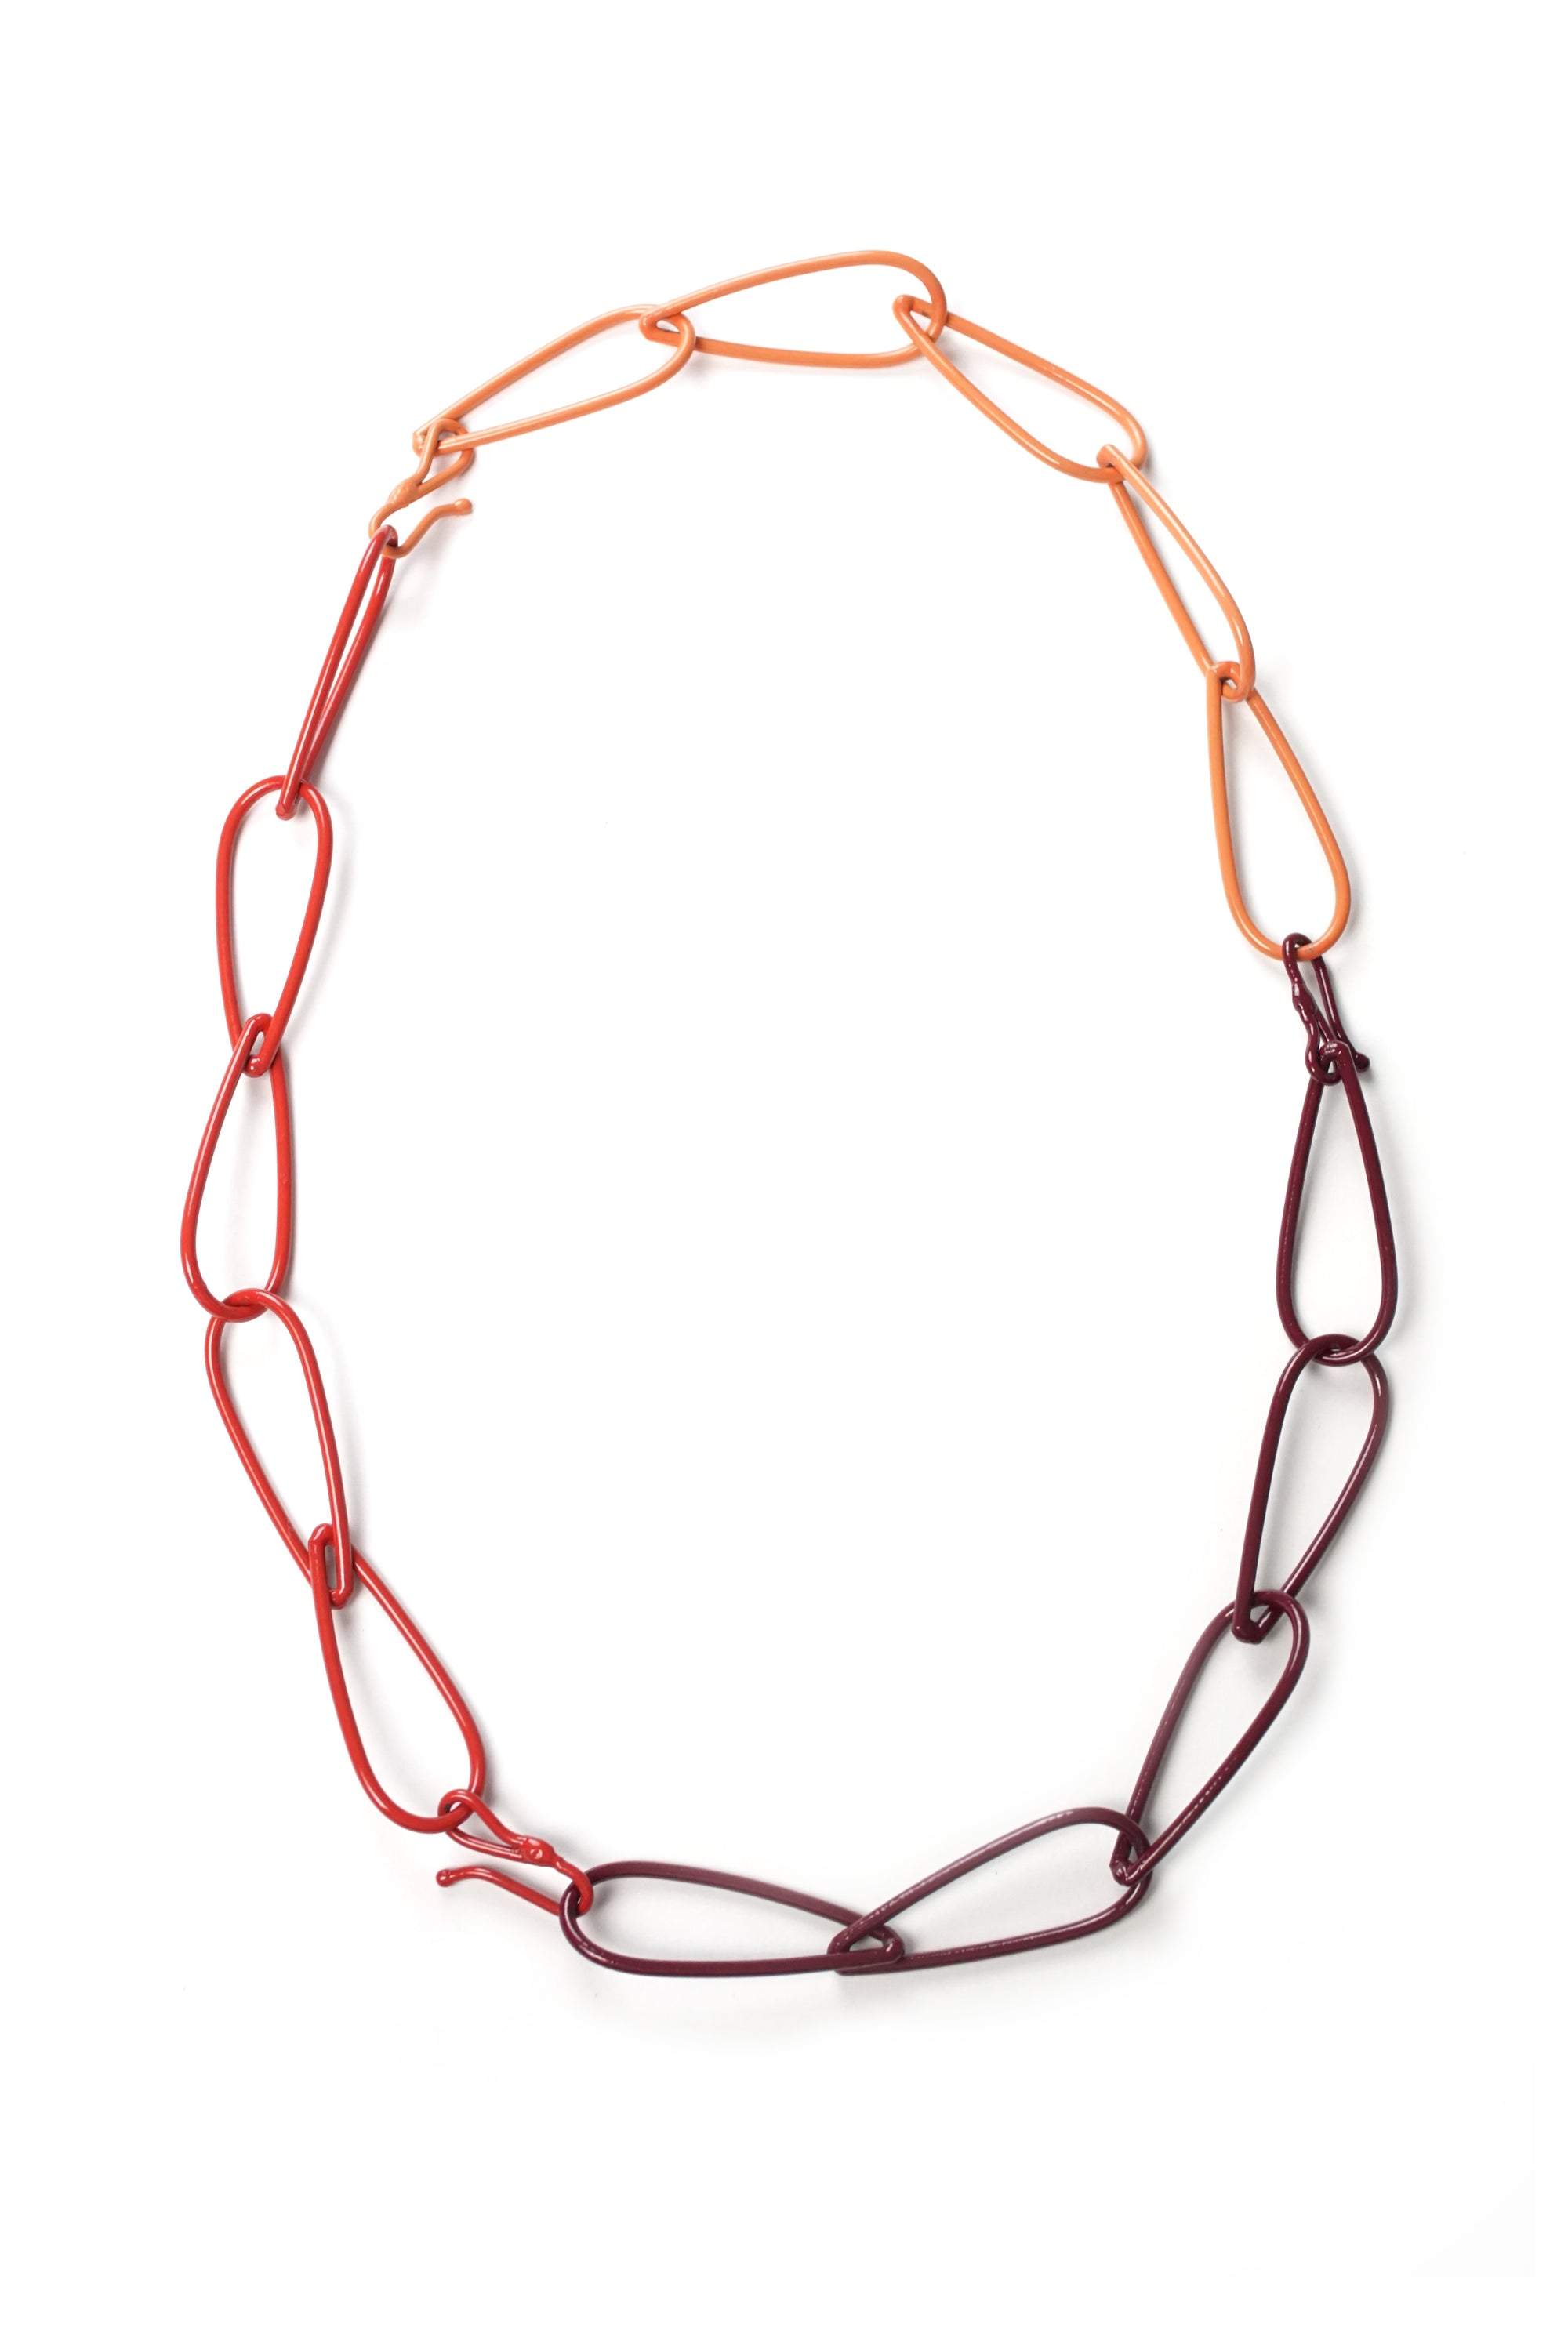 Modular Necklace in Lush Burgundy, Coral Red, and Desert Coral